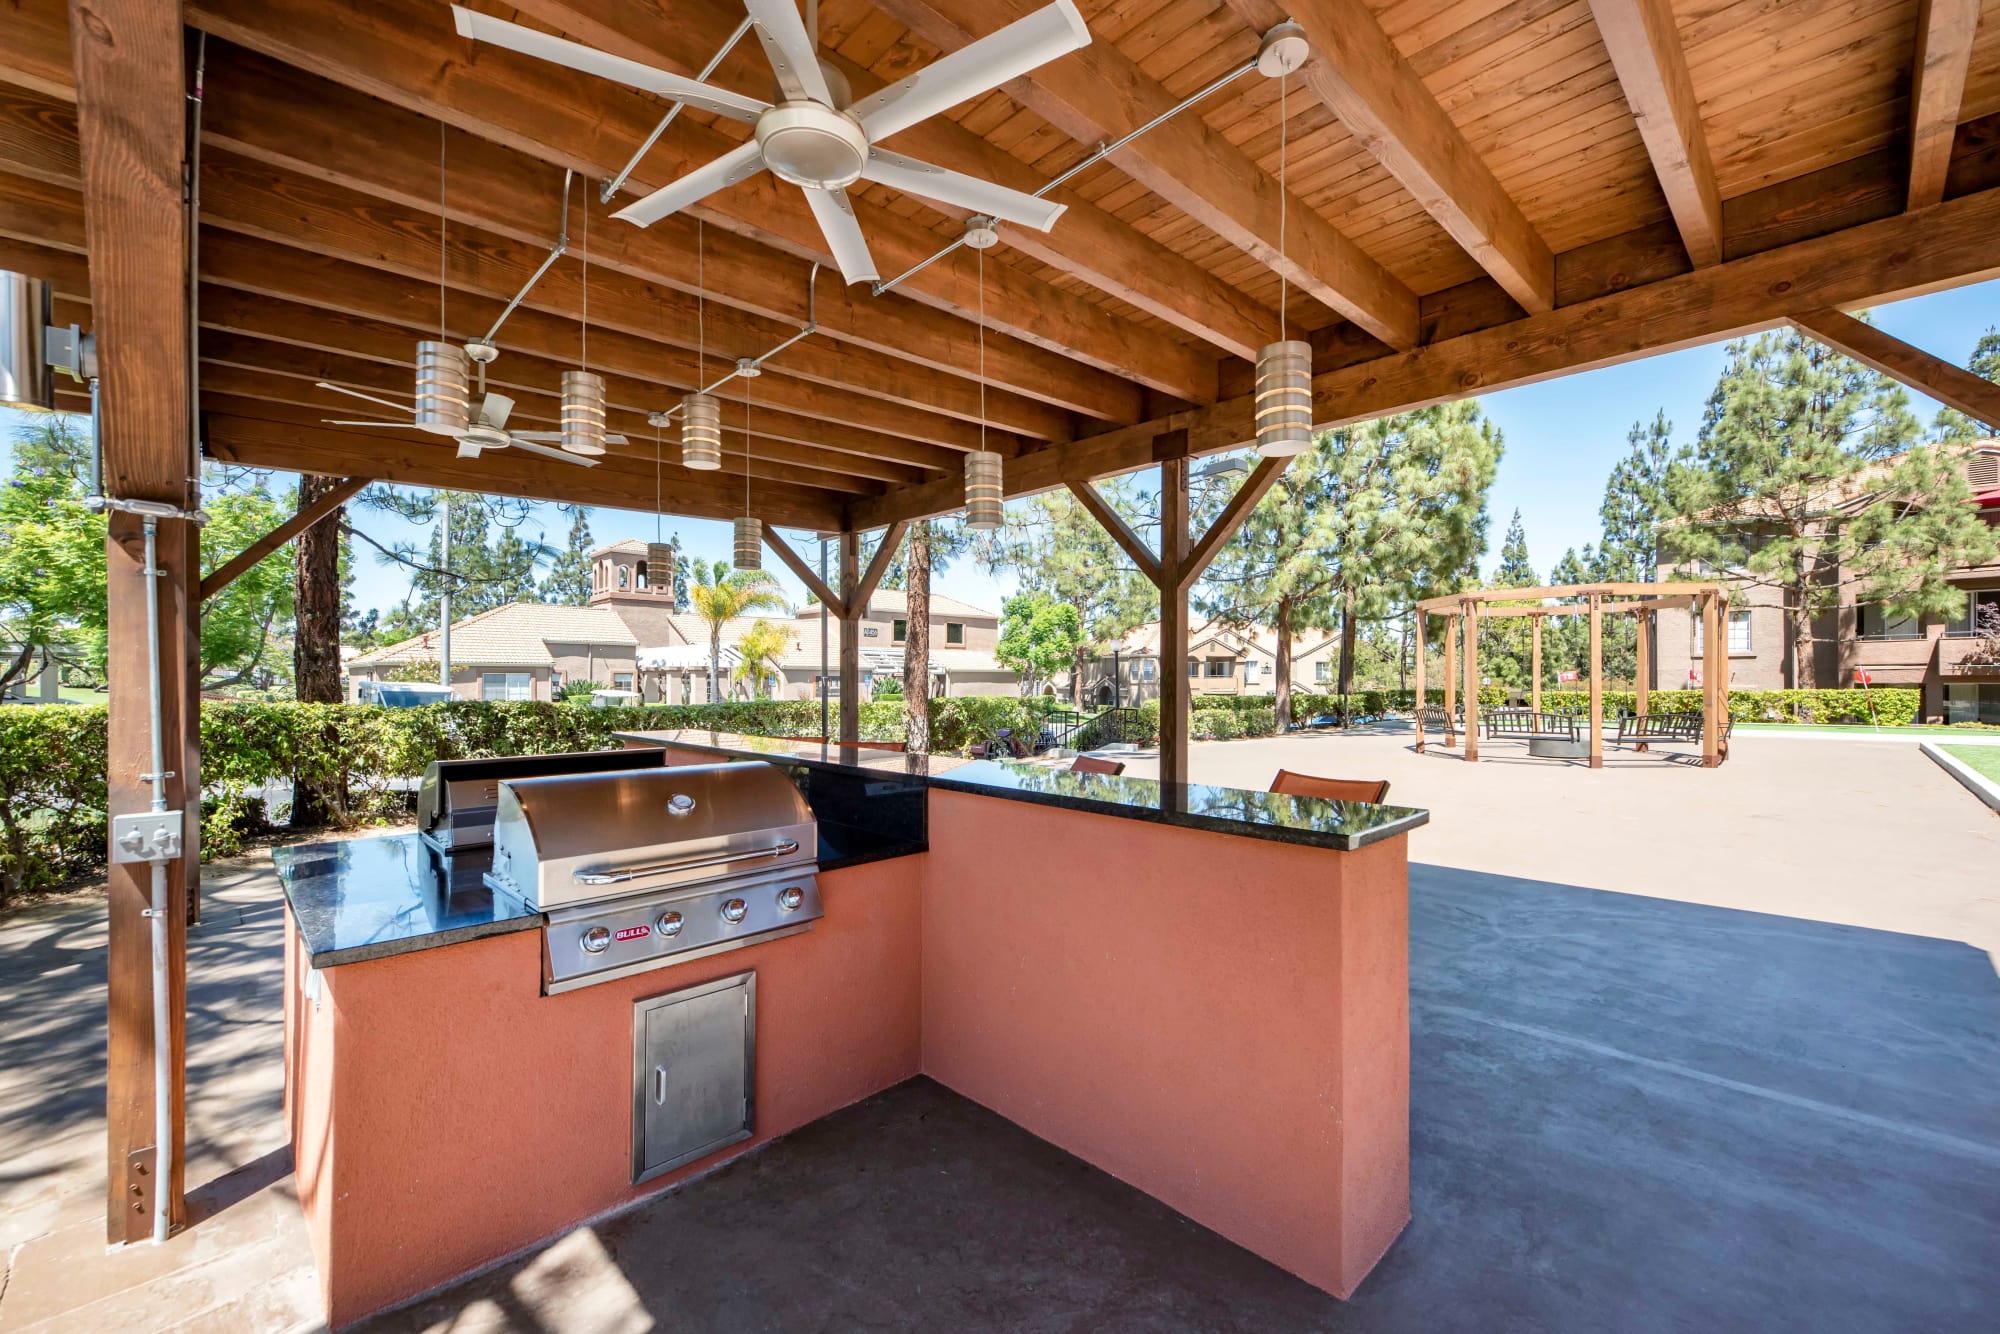 Covered BBQ area with bar top seating and fans at Sierra Del Oro Apartments in Corona, California